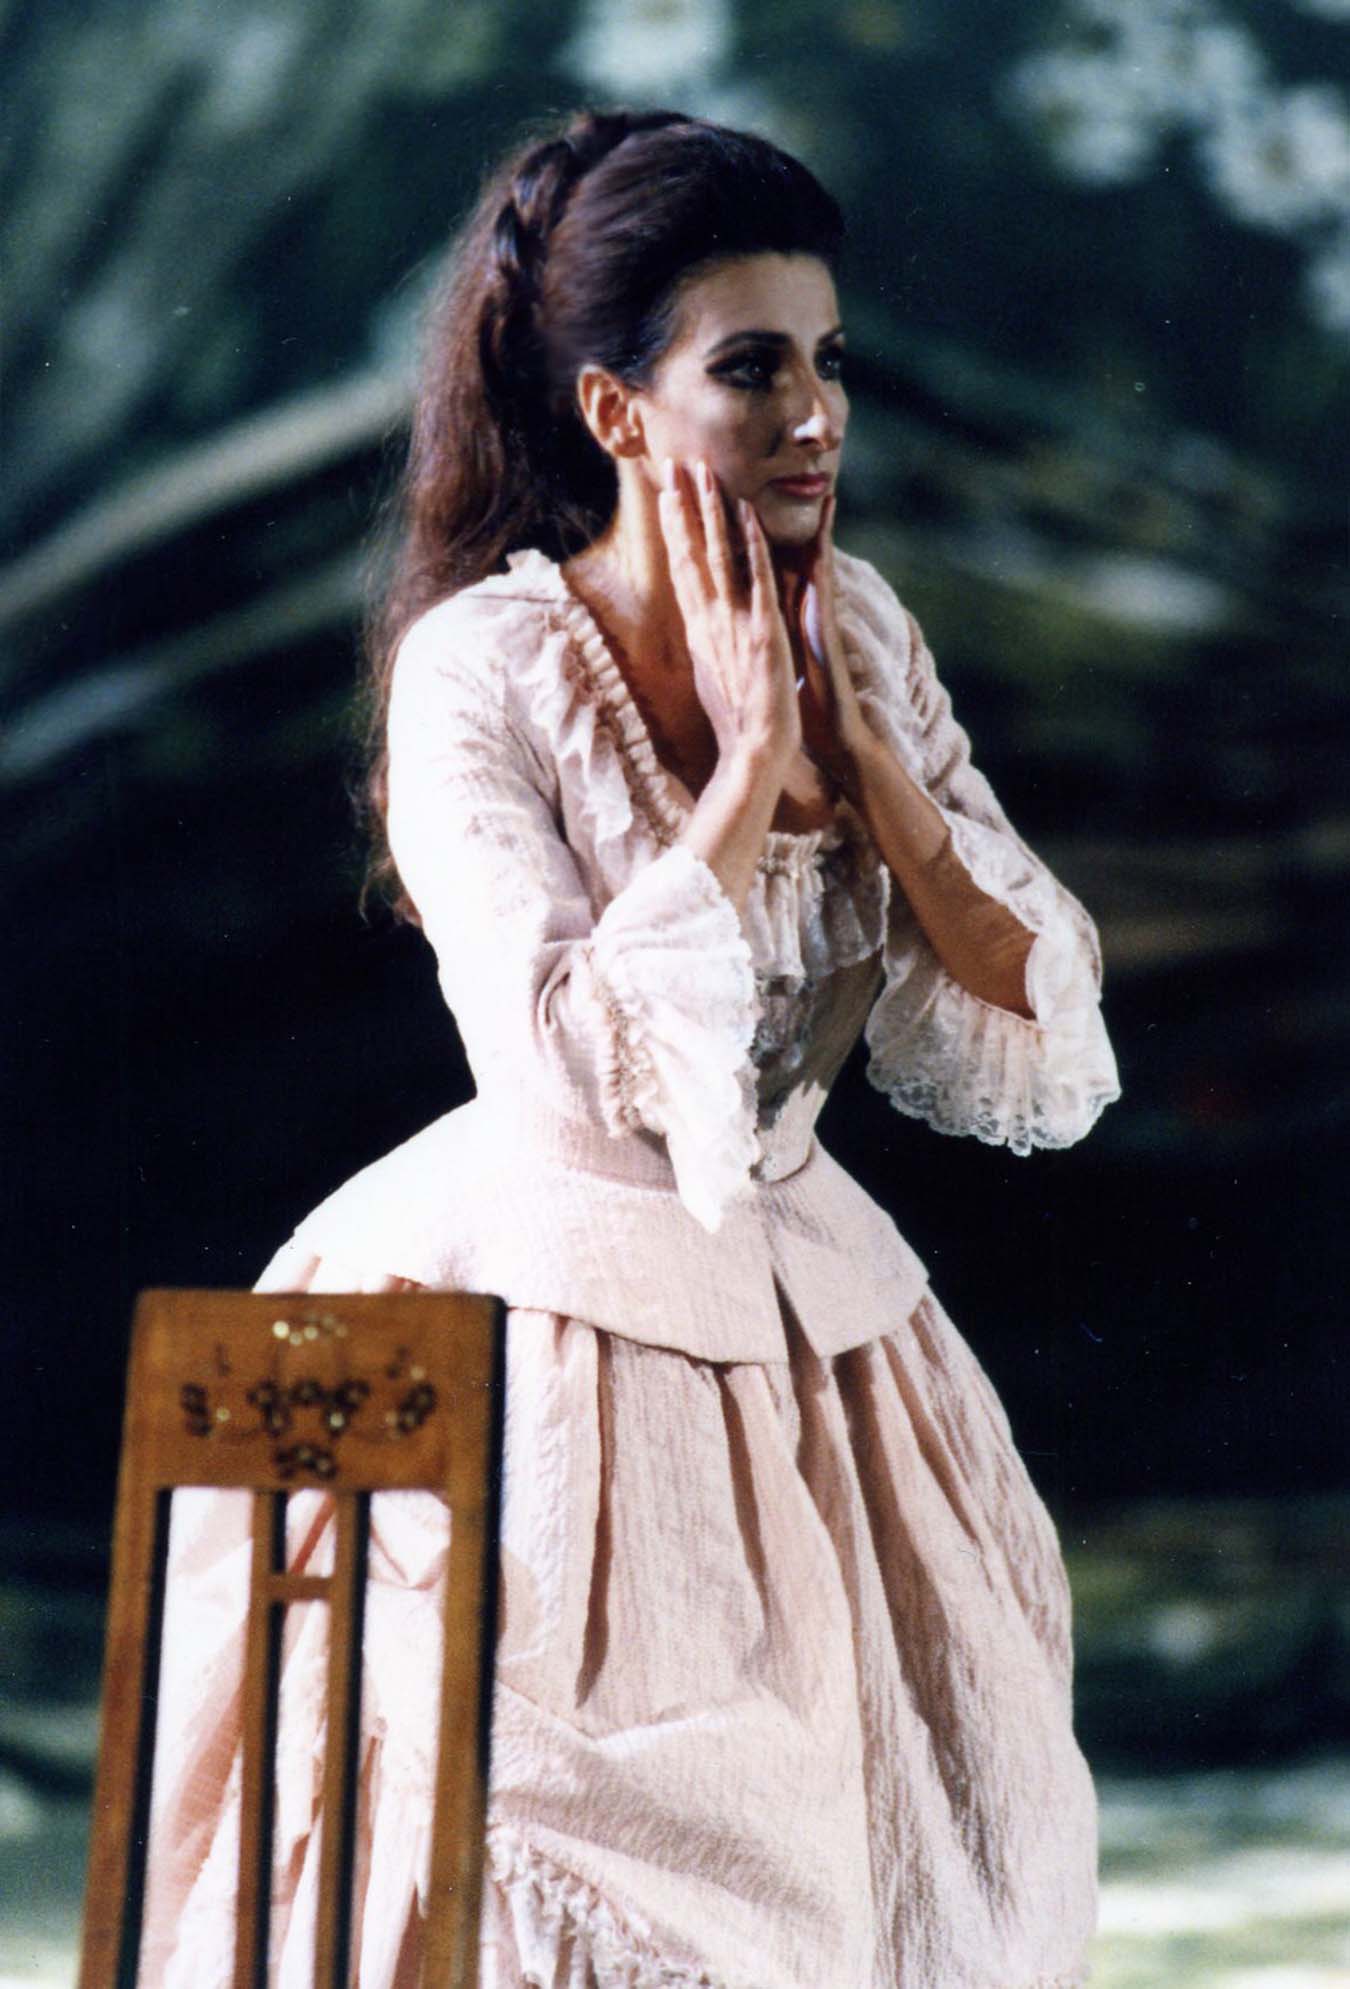 Lucia Aliberti⚘Opera⚘"La Traviata"⚘Nagoya⚘Co-Production with Rome Opera House⚘Japan Tour⚘Directed by Henning Brockhaus⚘On Stage⚘Photo taken from the Newspaper⚘:http://www.luciaaliberti.it #luciaaliberti #opera #latraviata #nagoya #coproductionwithromeoperahouse #japantour #henningbrockhaus #onstage